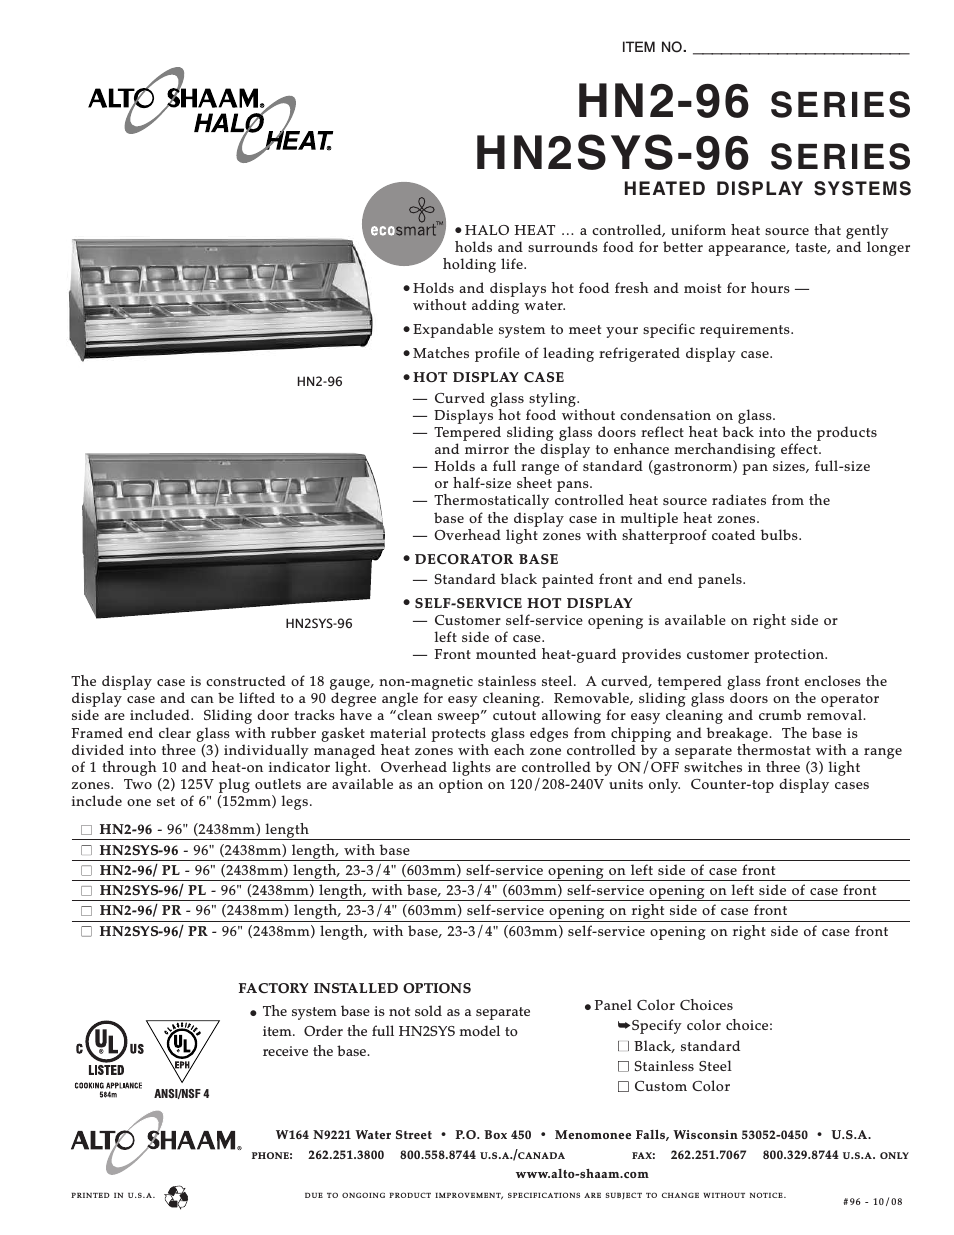 HN2SYS-96